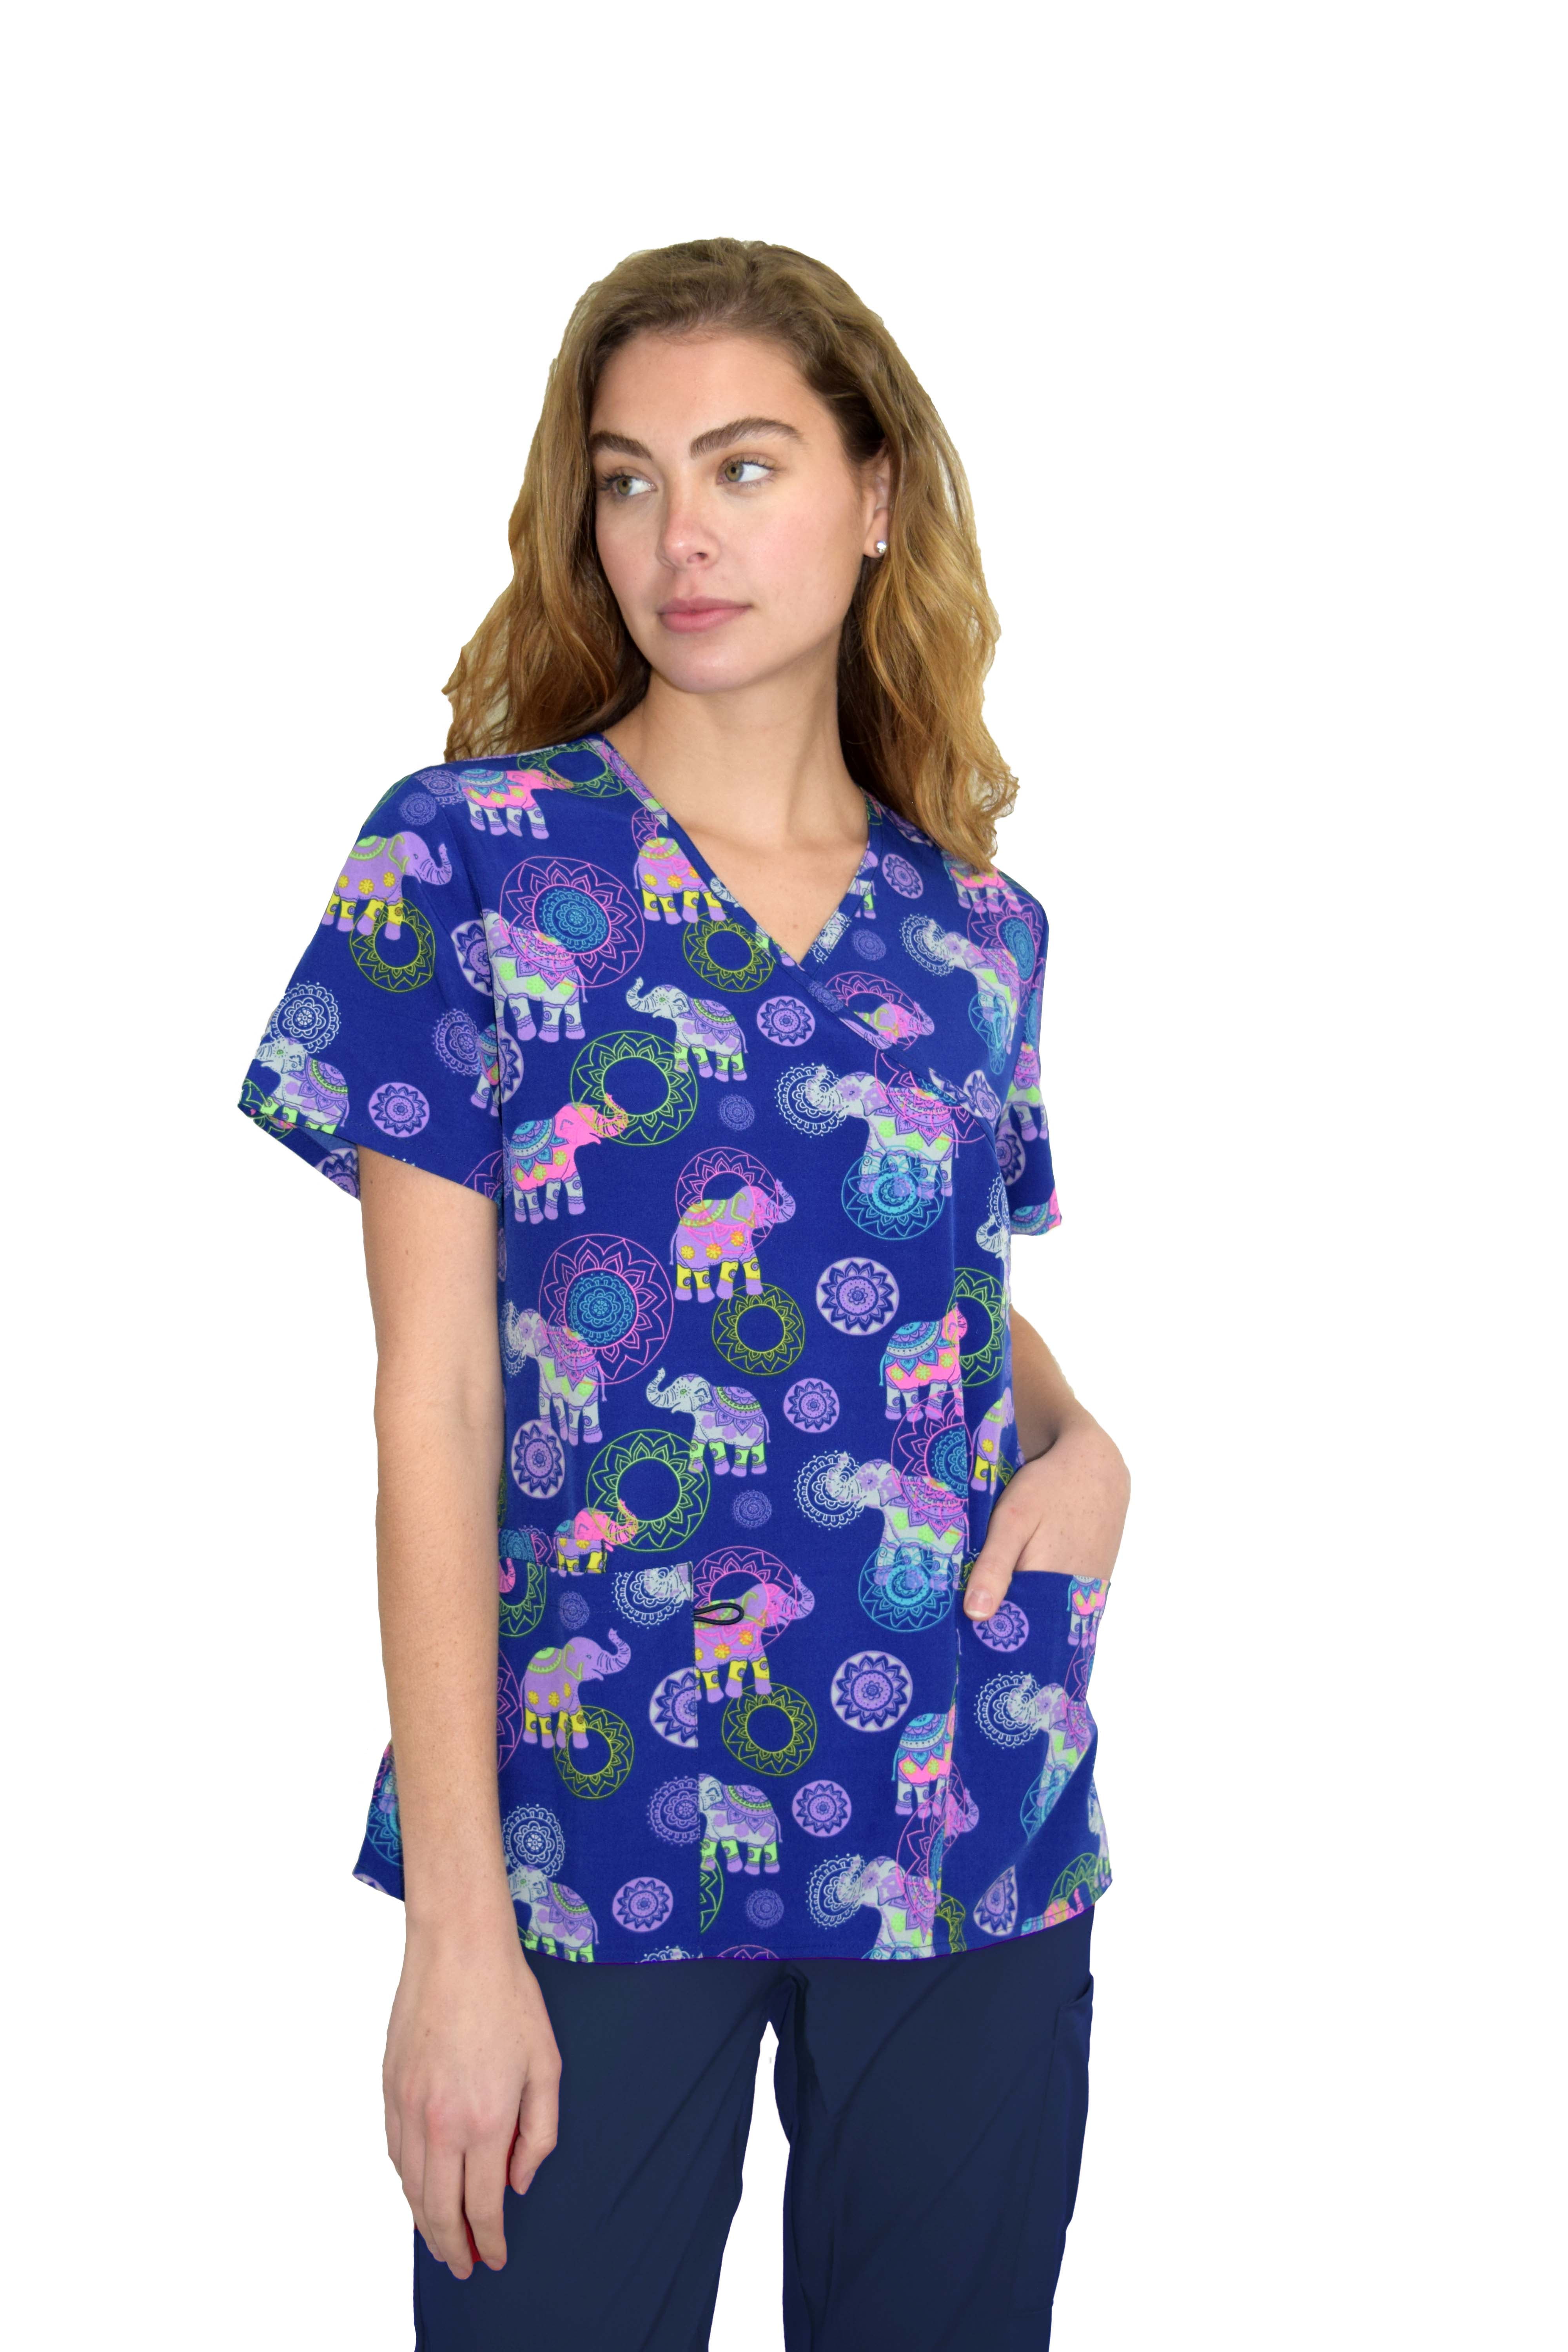 Cute Scrubs Uniforms for Women Uniform Ideal for Nurse Dog Cat Printed Medical Healthcare and Beauty Tunics Tops Animal Uniform Doctor Shirts 